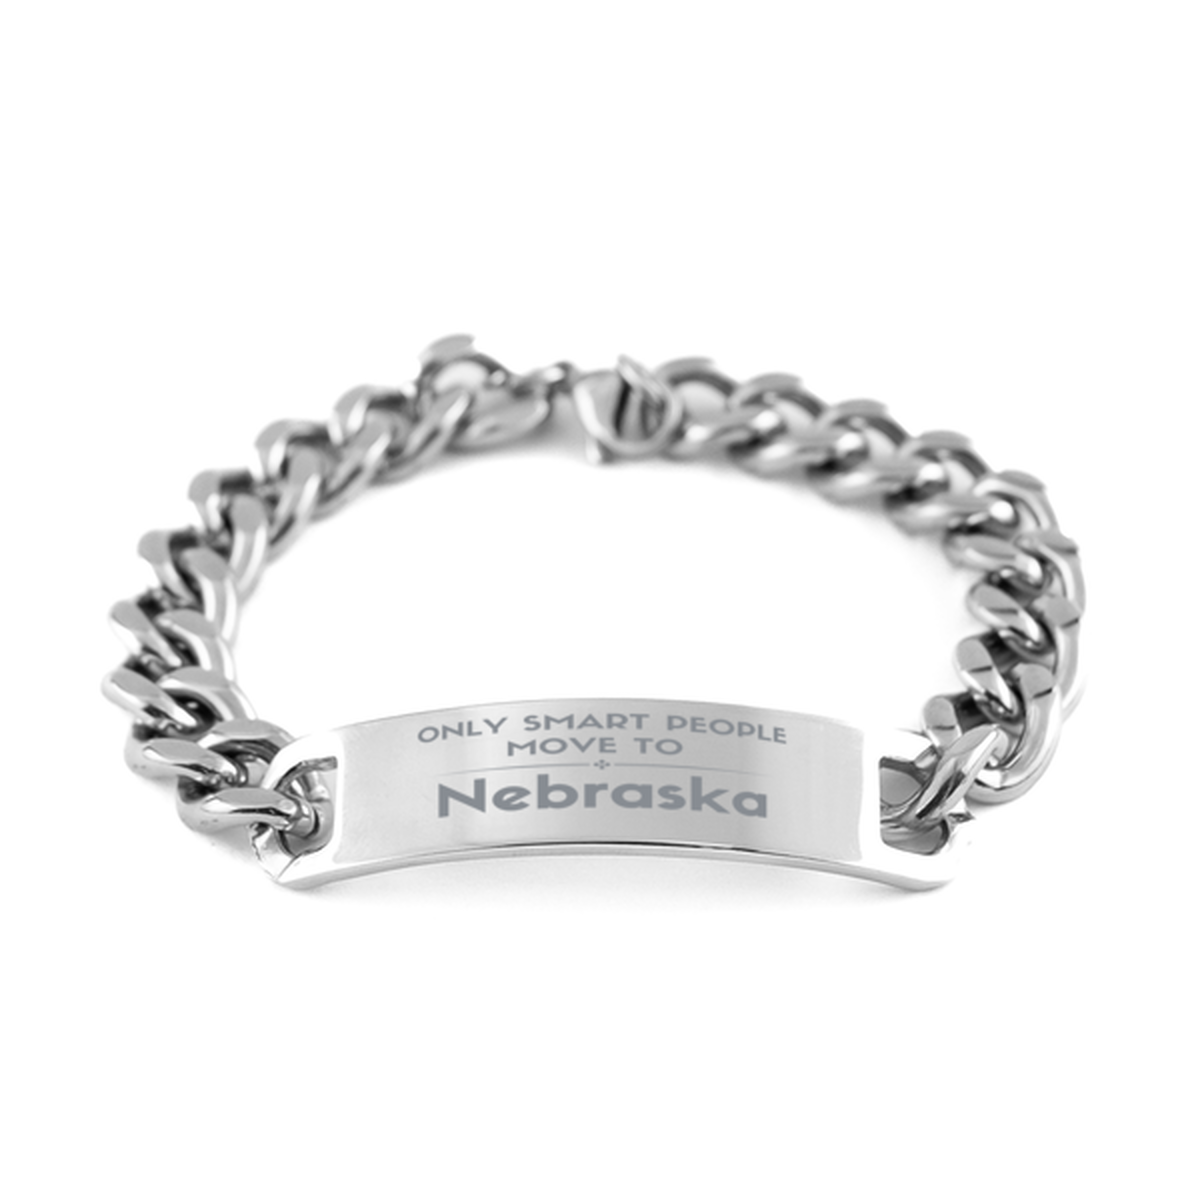 Only smart people move to Nebraska Cuban Chain Stainless Steel Bracelet, Gag Gifts For Nebraska, Move to Nebraska Gifts for Friends Coworker Funny Saying Quote